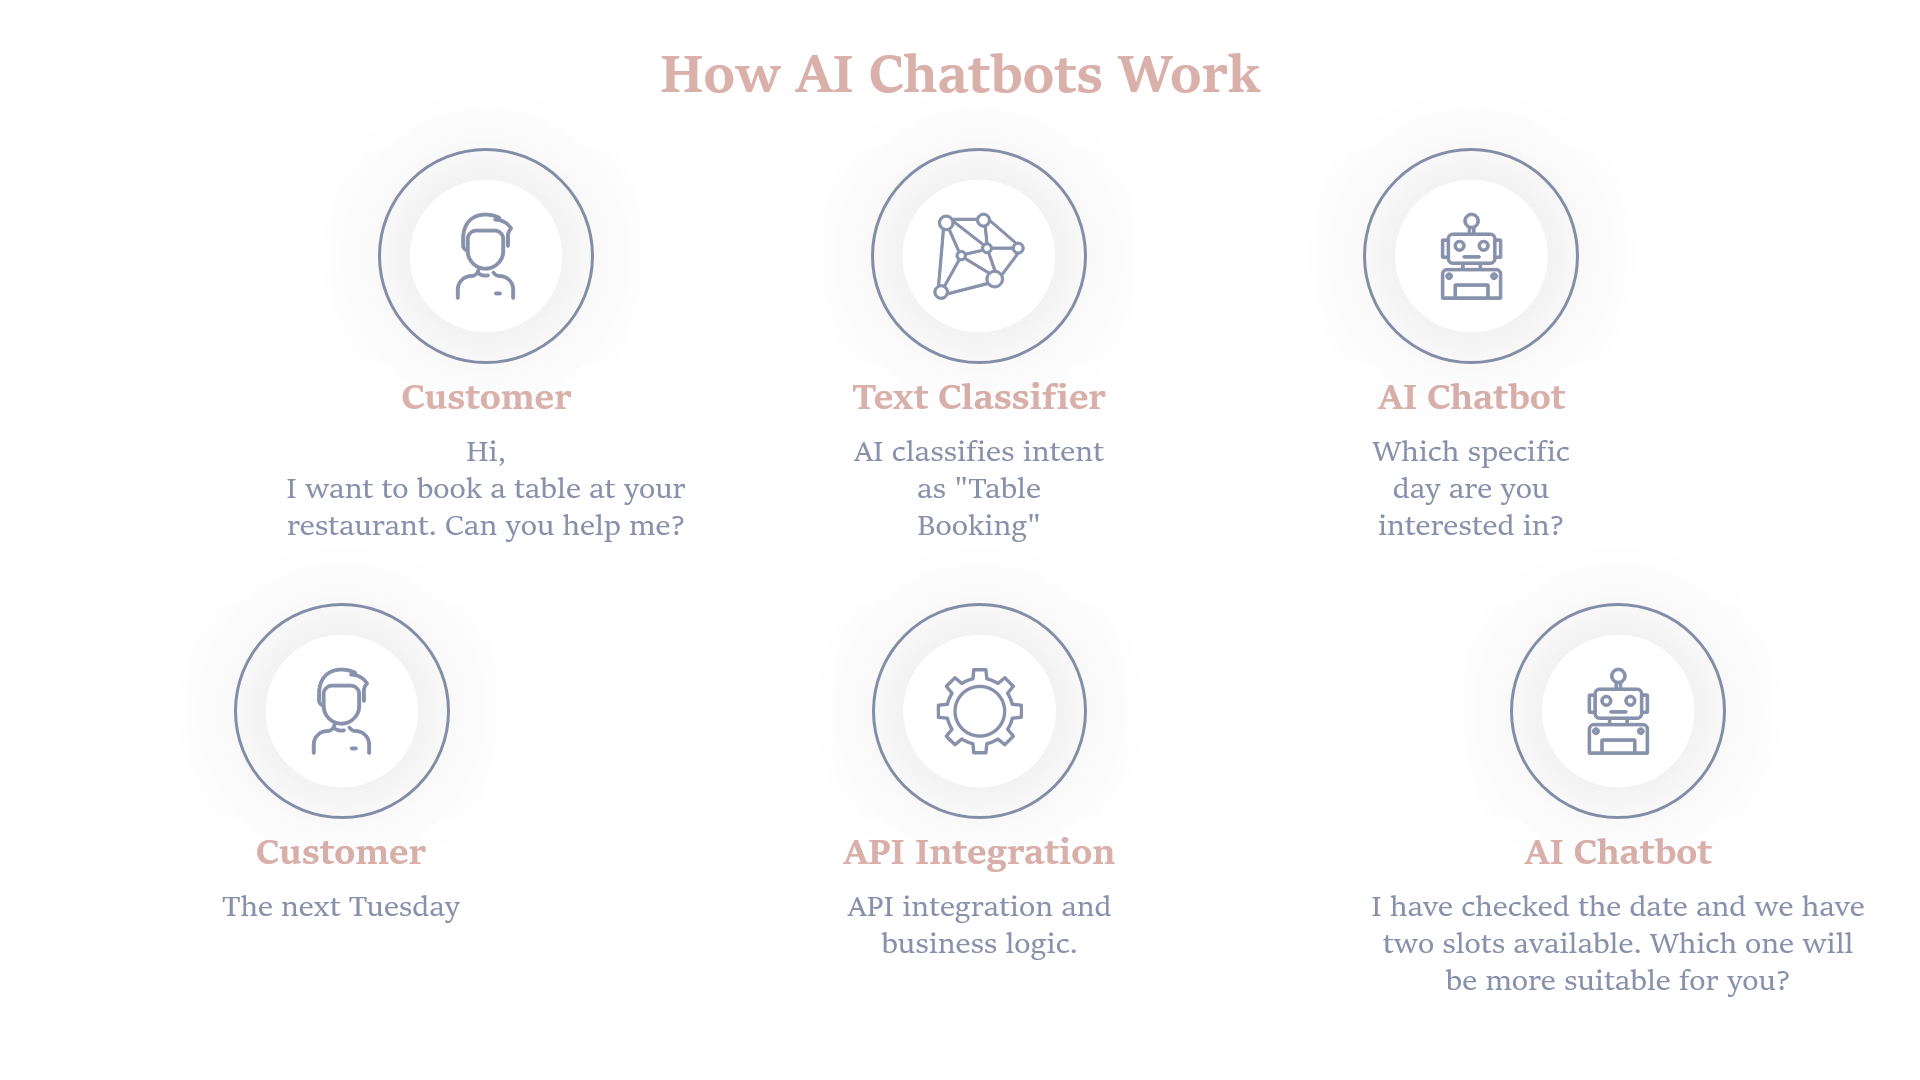 How to Make a Chatbot: Technologies & Business Benefits 2